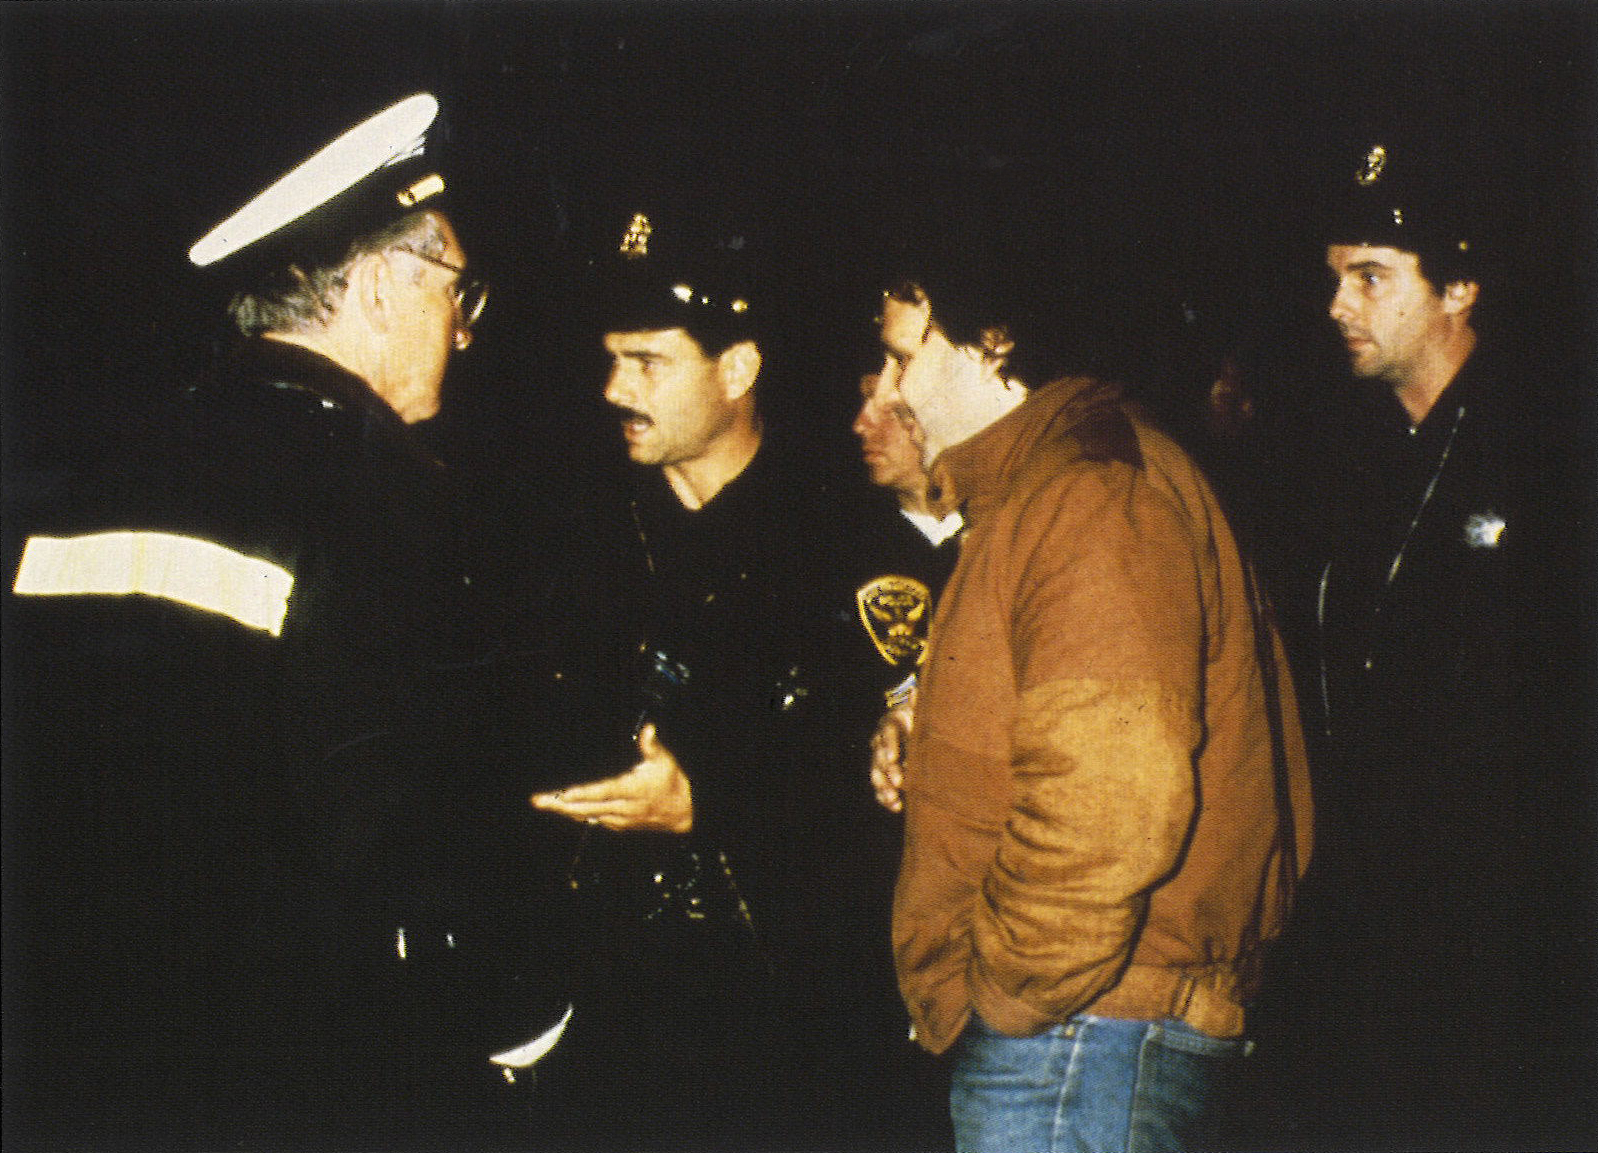 Photograph of four  police and firefighters and a man in a tan jacket against a black background